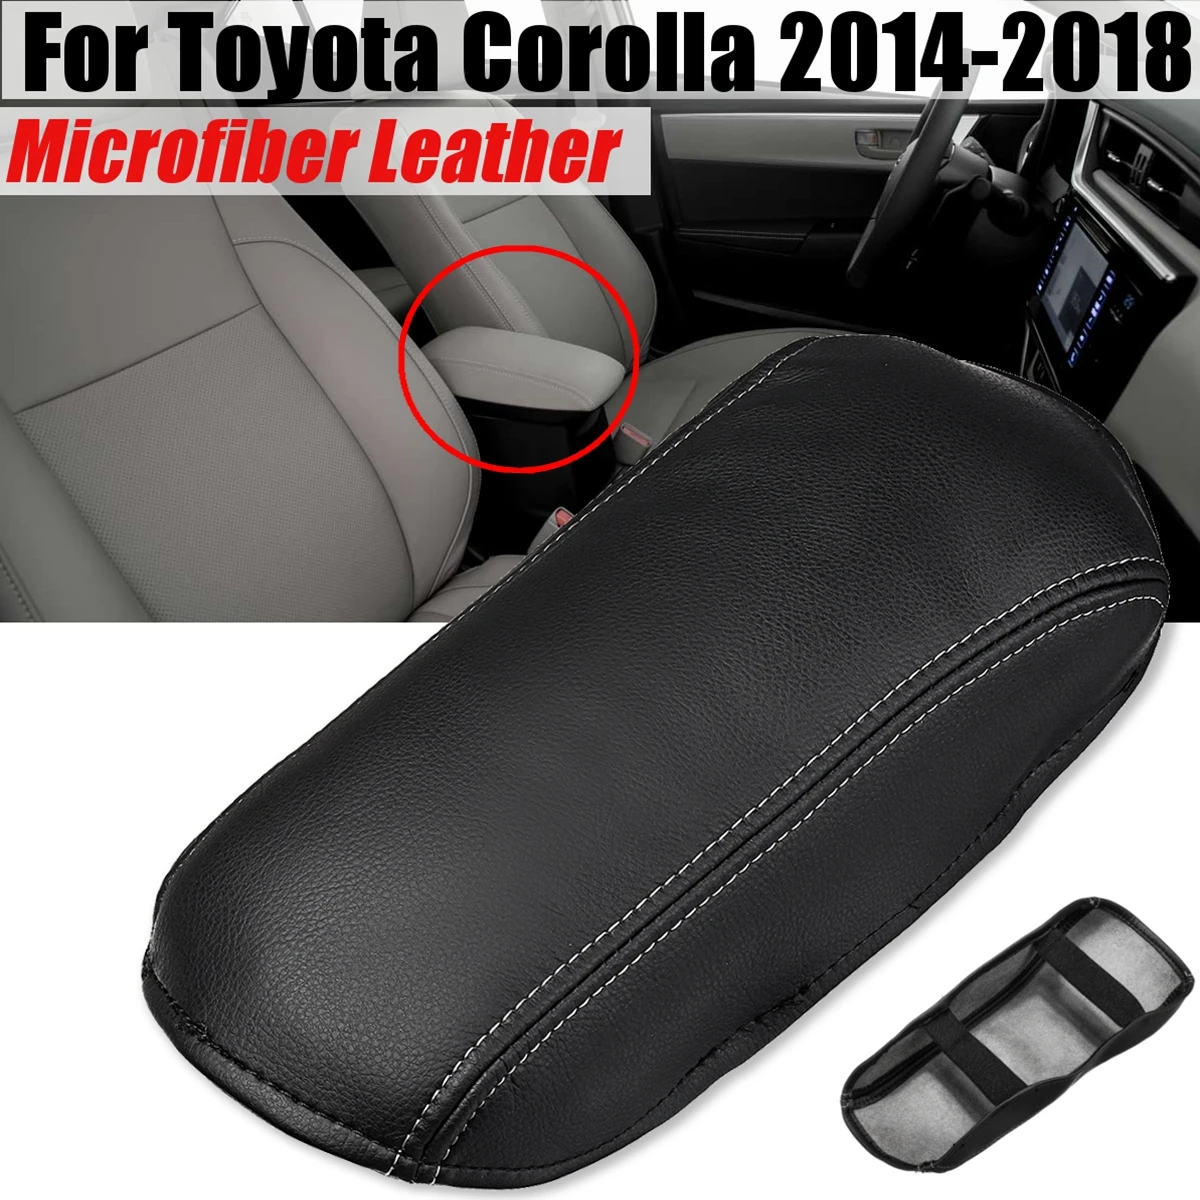 Leegi Car Armrest Box Cover Center Console Saver Covers for 2014 2015 2016 2017 2018 Toyota Corolla,Black with Red Stitches 